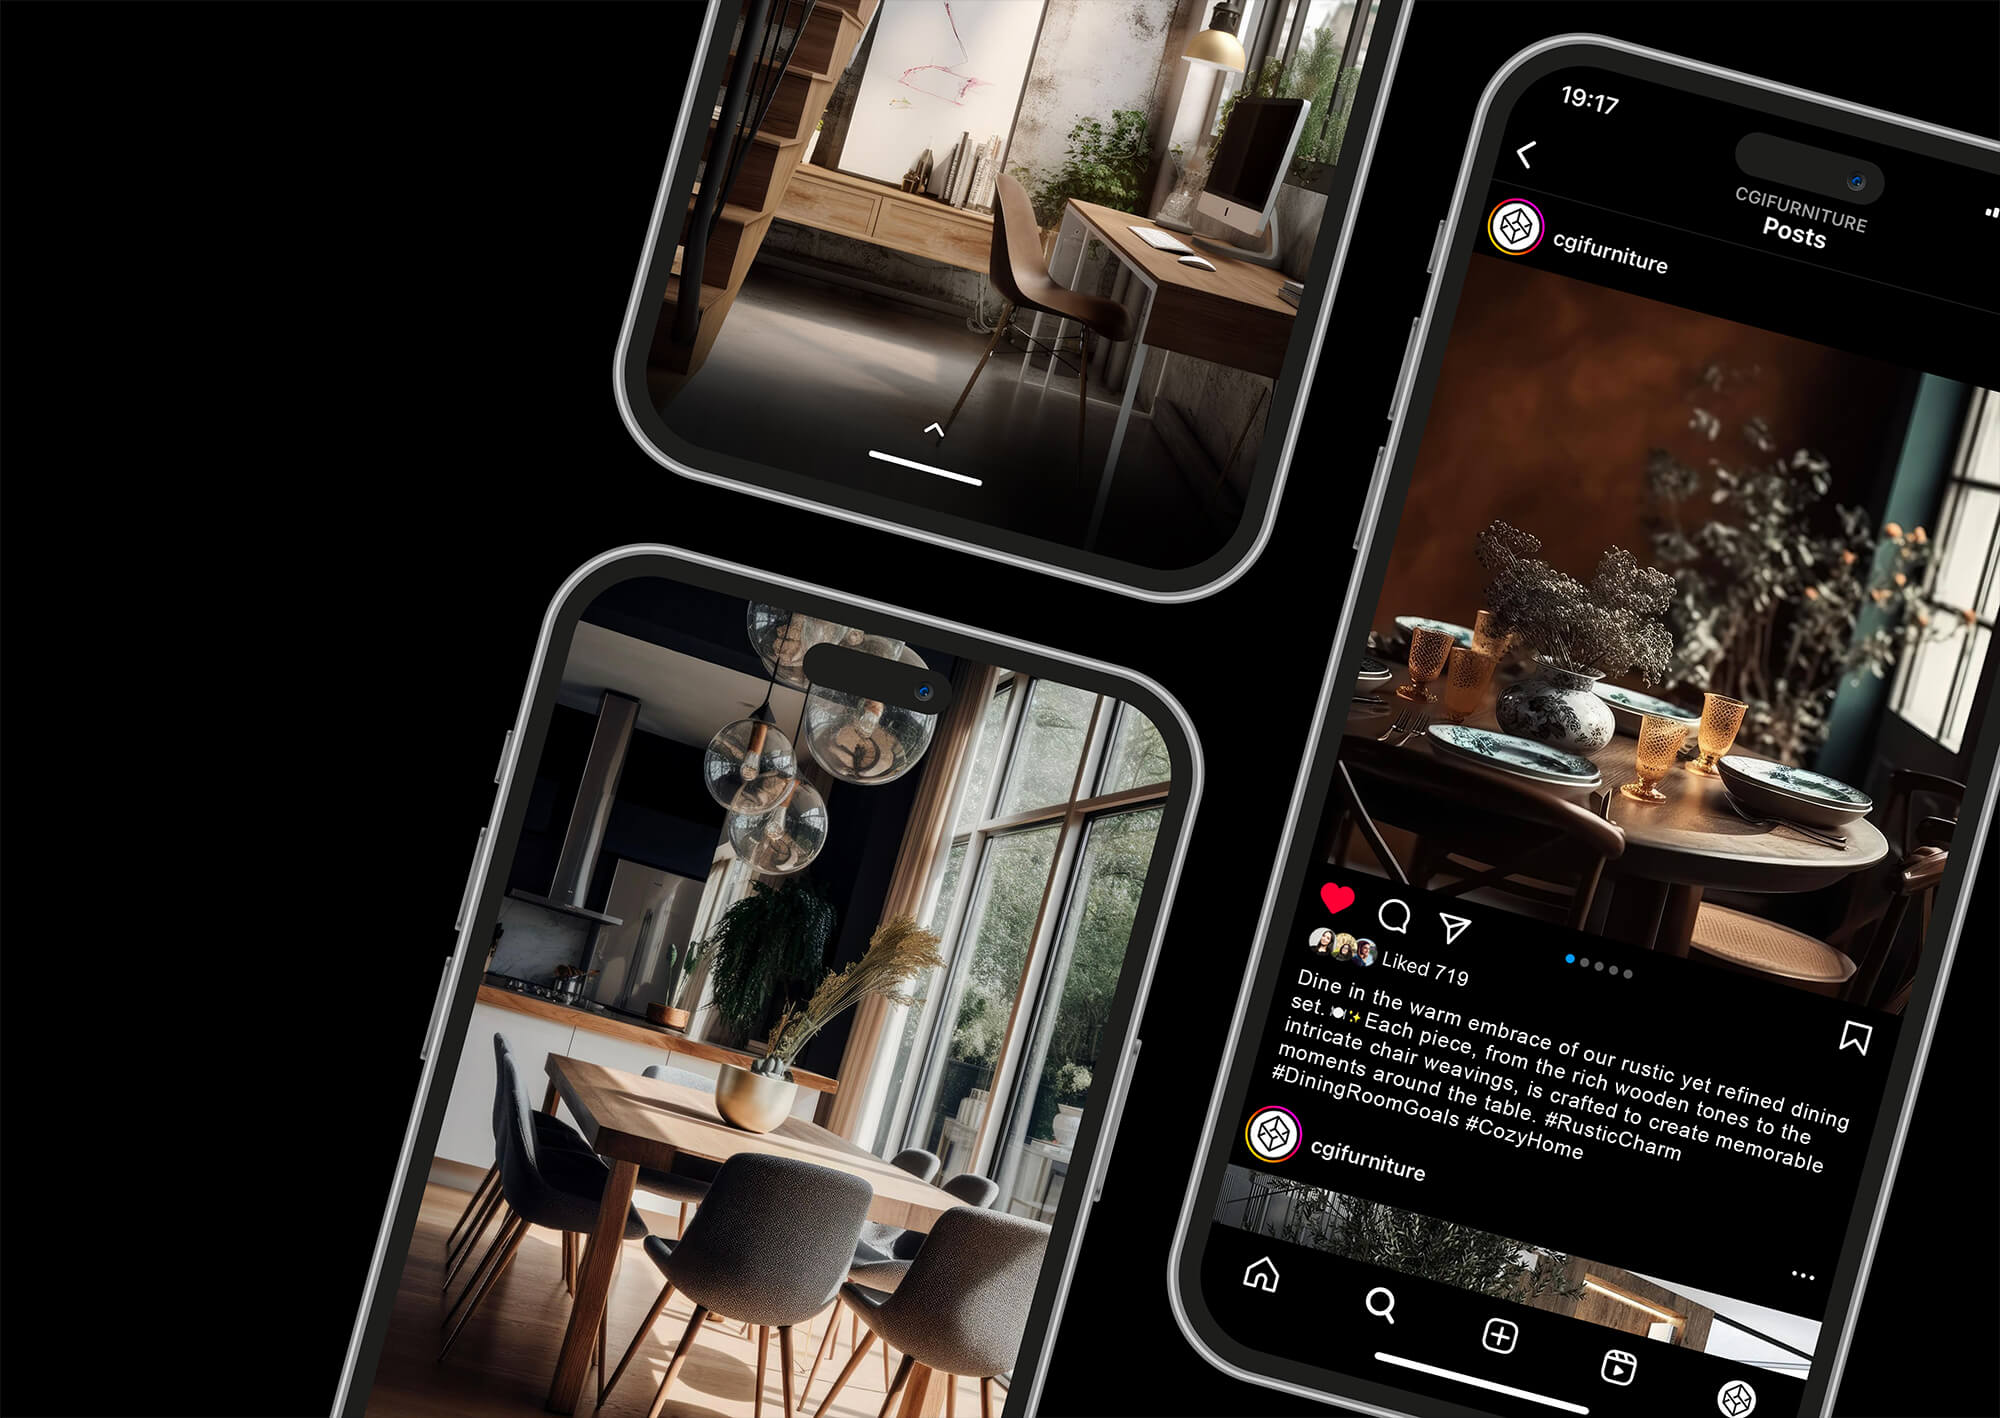 Smartphones displaying furniture on social media relate to evolving e-commerce strategies, demonstrating the shift towards mobile-first shopping experiences.